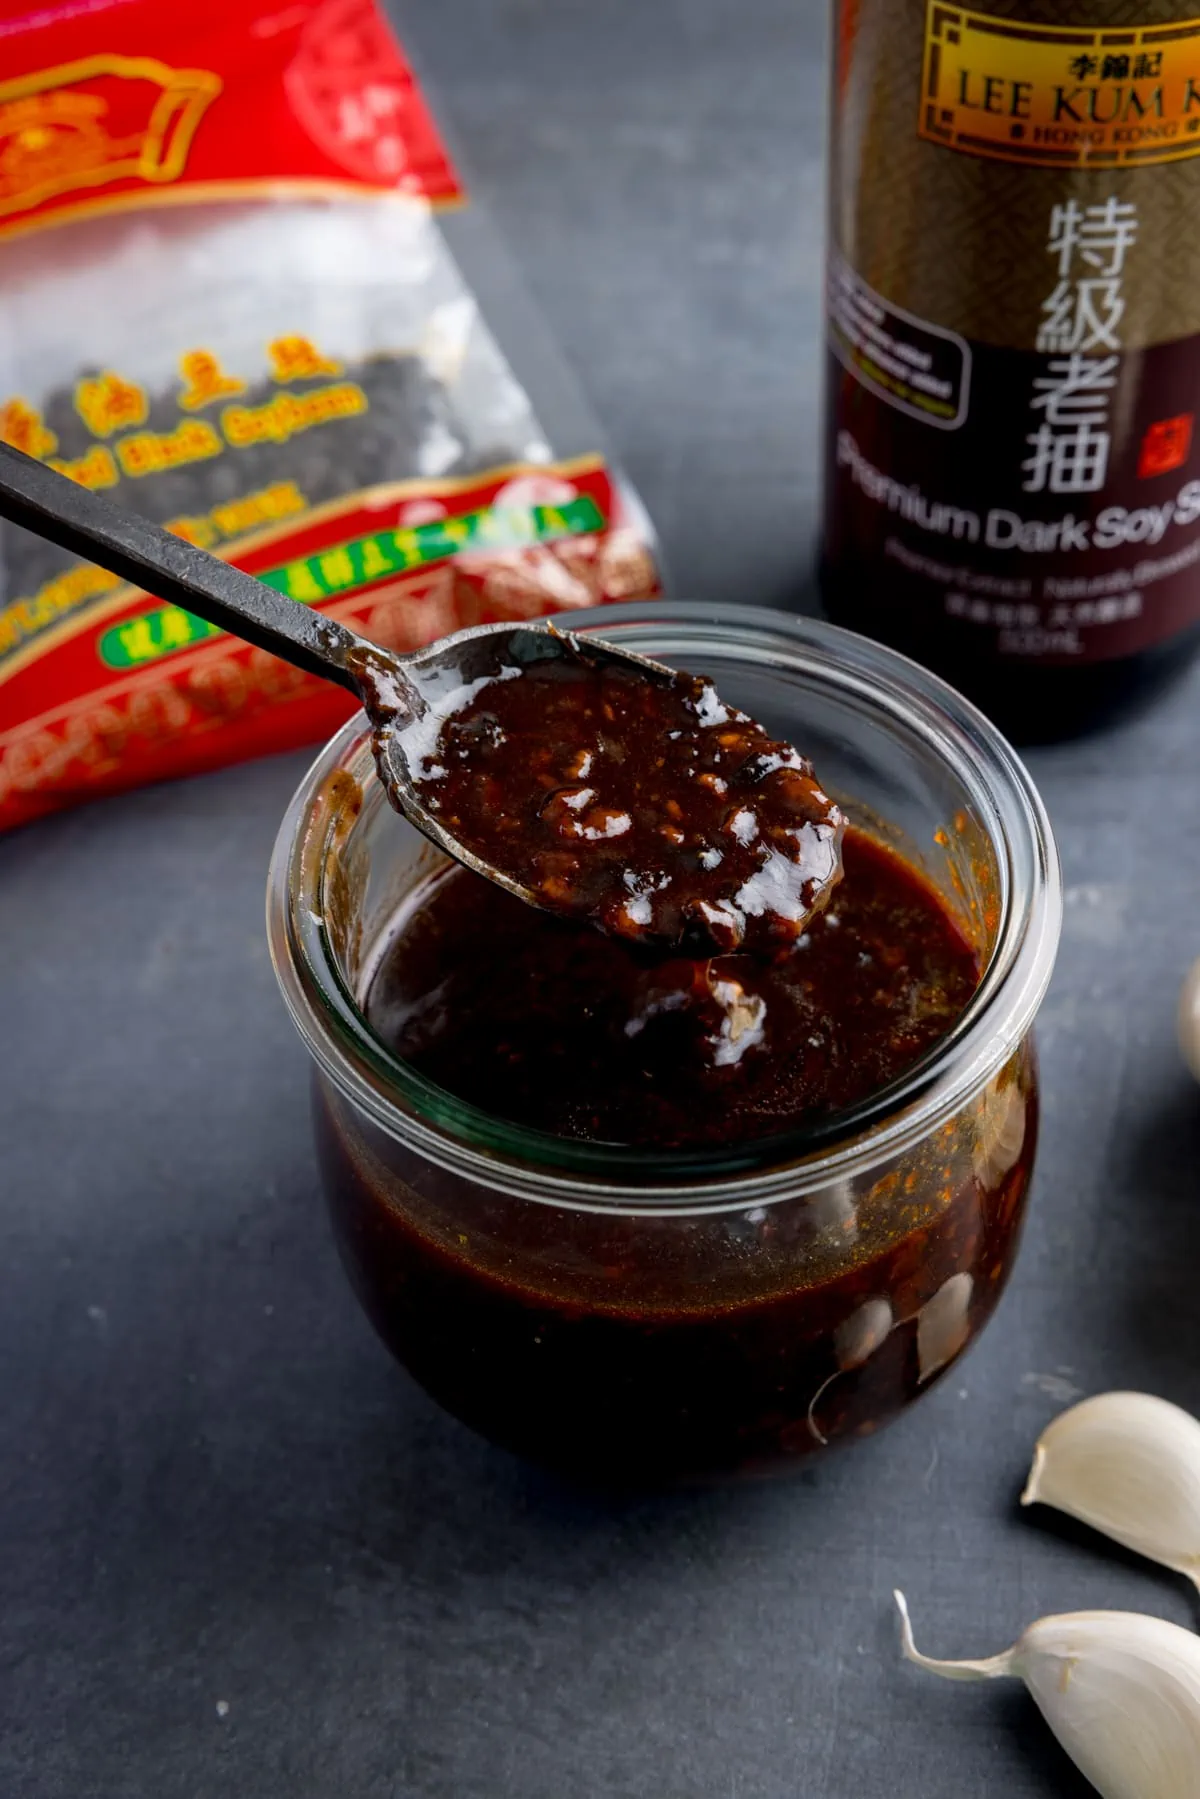 How to Make Soy Sauce at Home (Korean Style from Start to Finish!)